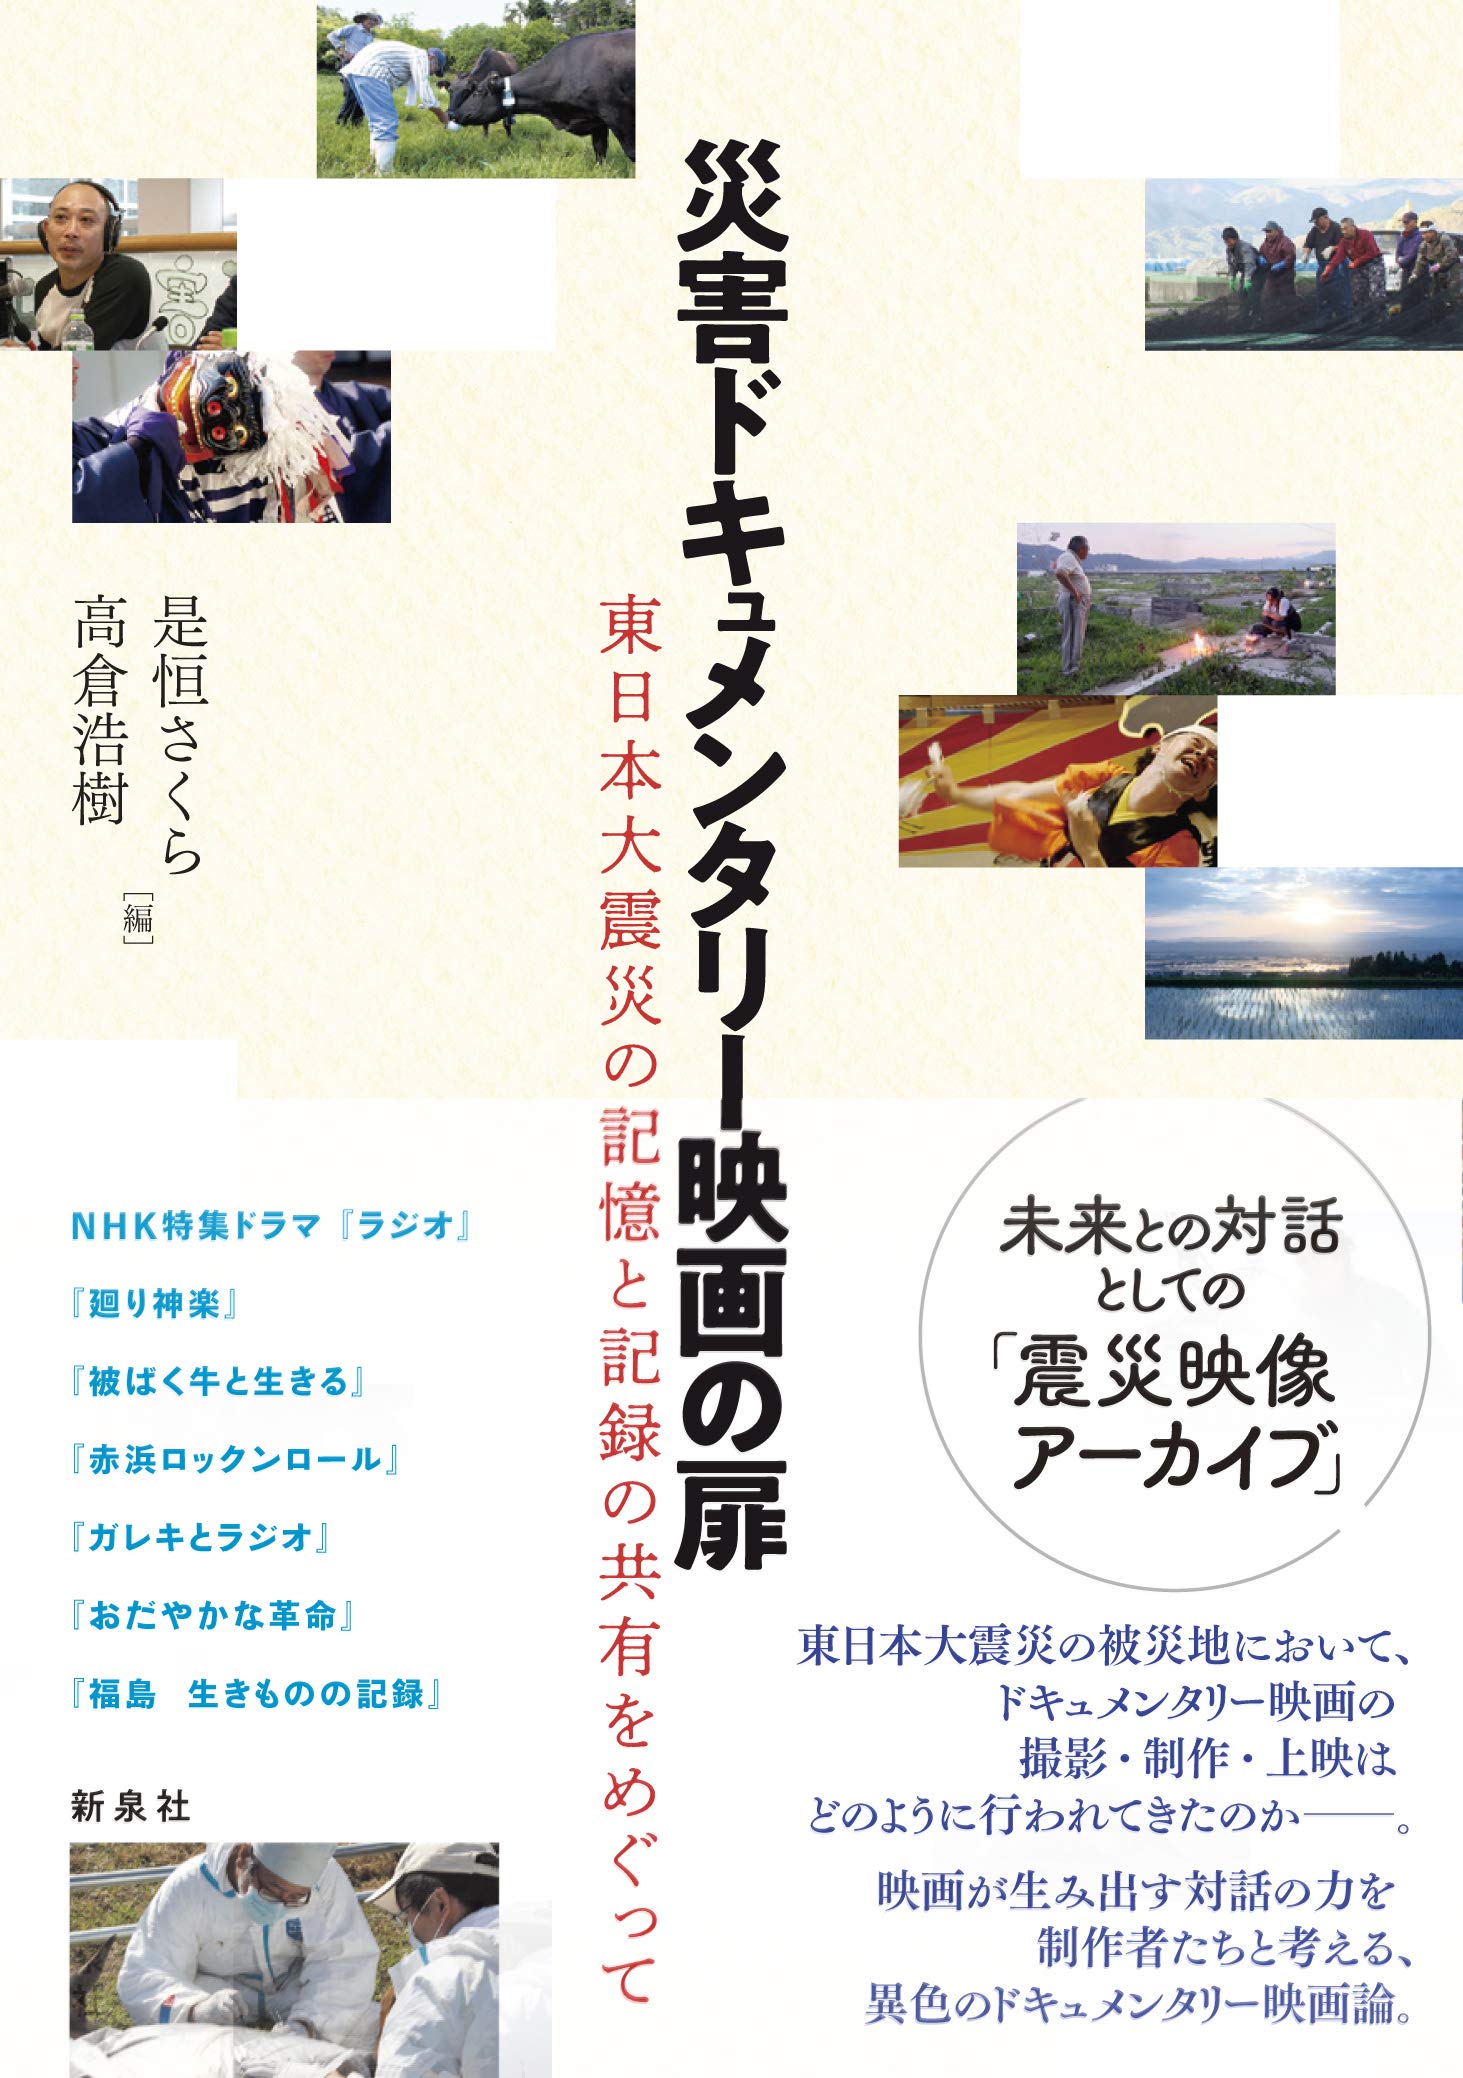  disaster documentary movie. door - East Japan large earthquake. memory . record. also have .....